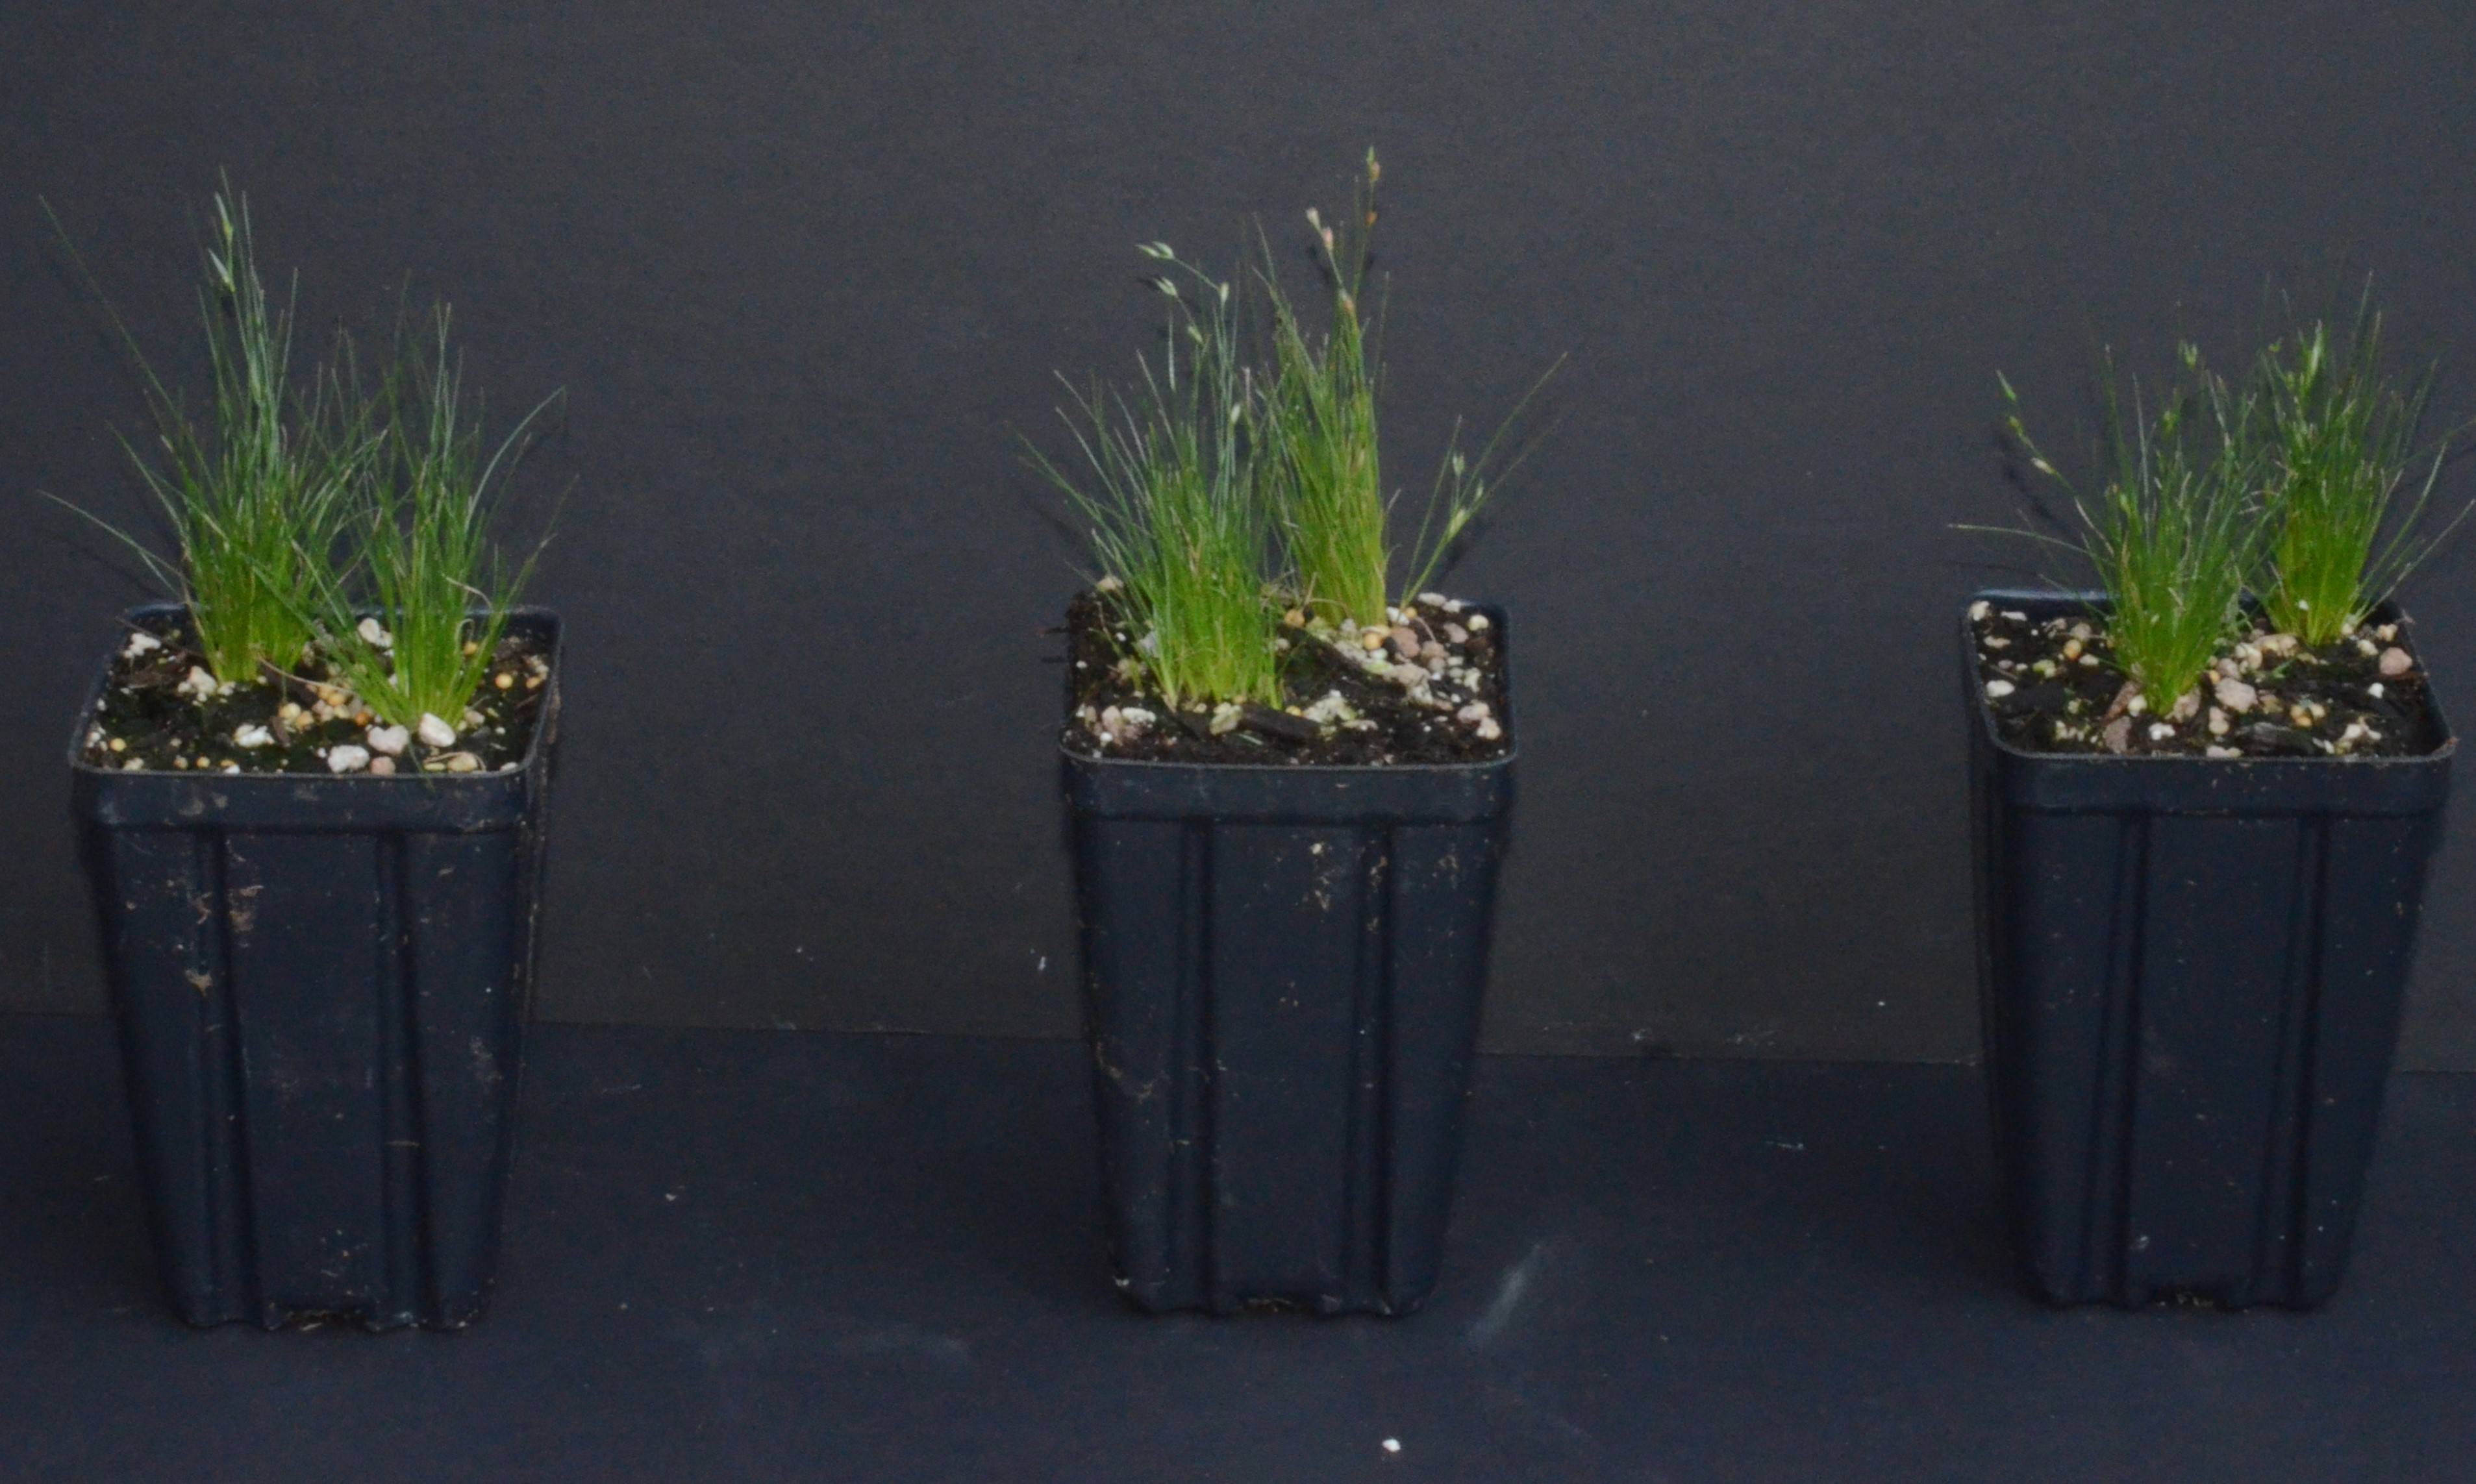 Juncus bufonius seedlings growing in 4-inch containers at the Berry Seed Bank research nursery in Portland, Oregon.